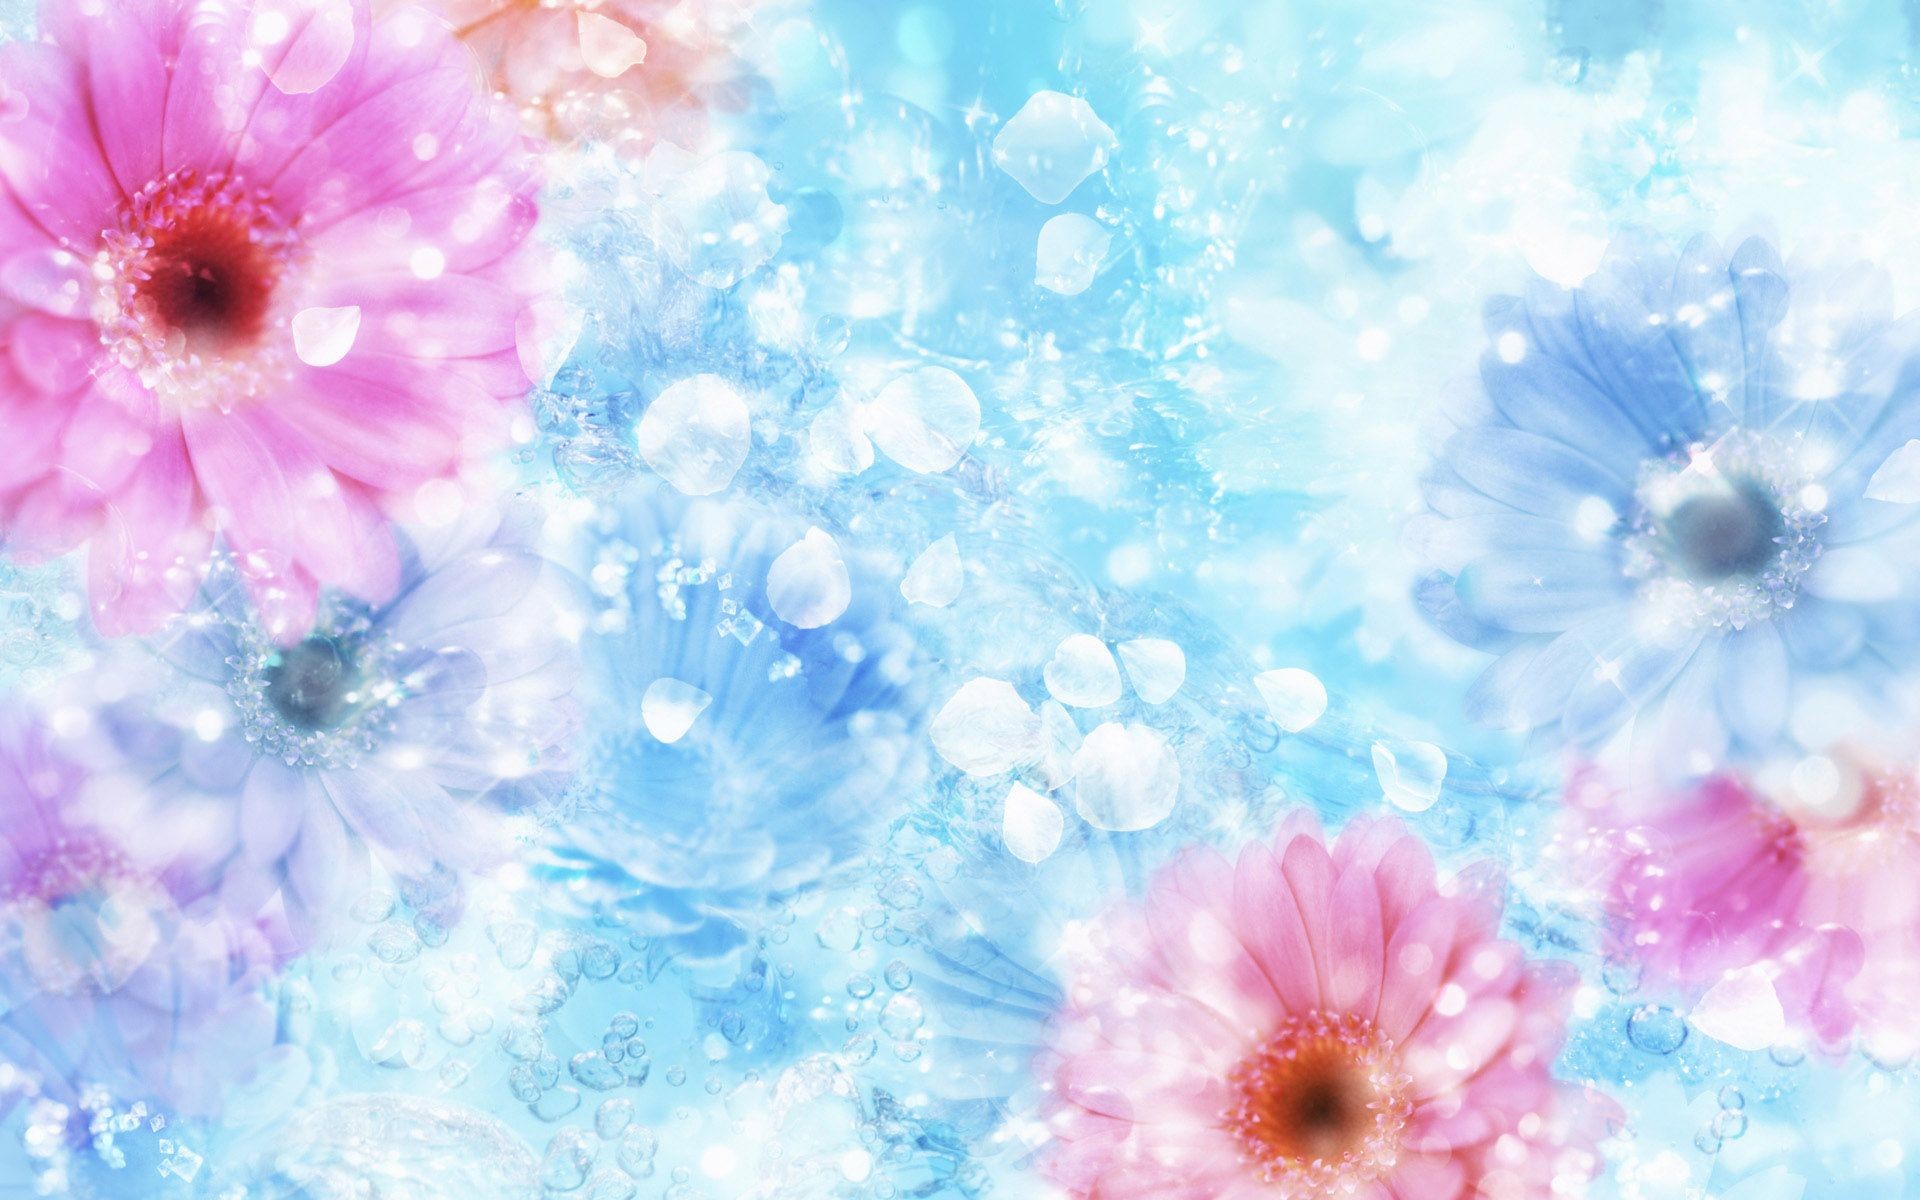 1920x1200 Floral Background Tumblr Wallpaper High Quality Resolution With Hd   Px 256 26 Kb Flowers Vintage ...